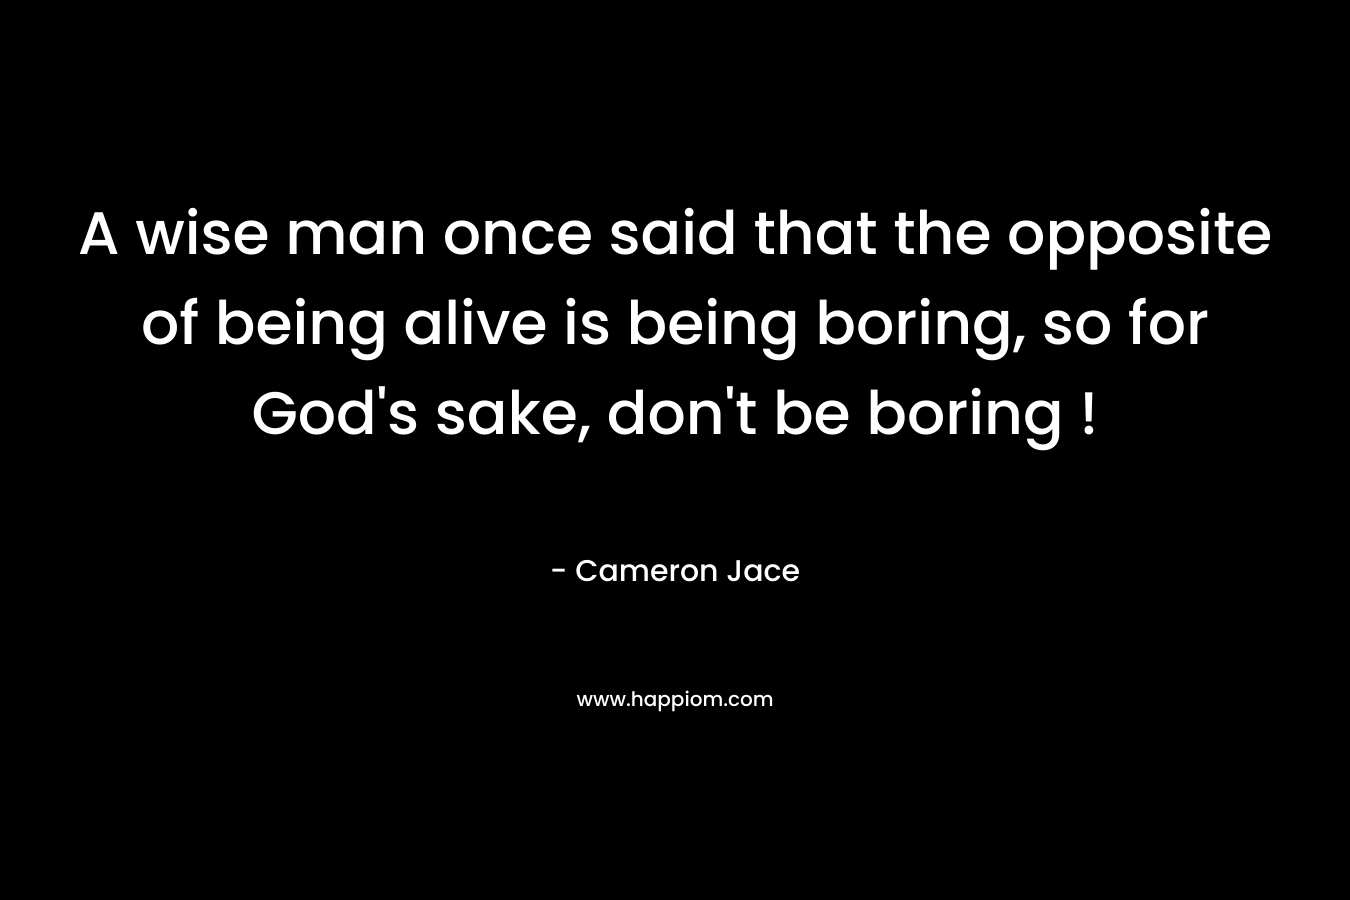 A wise man once said that the opposite of being alive is being boring, so for God's sake, don't be boring !